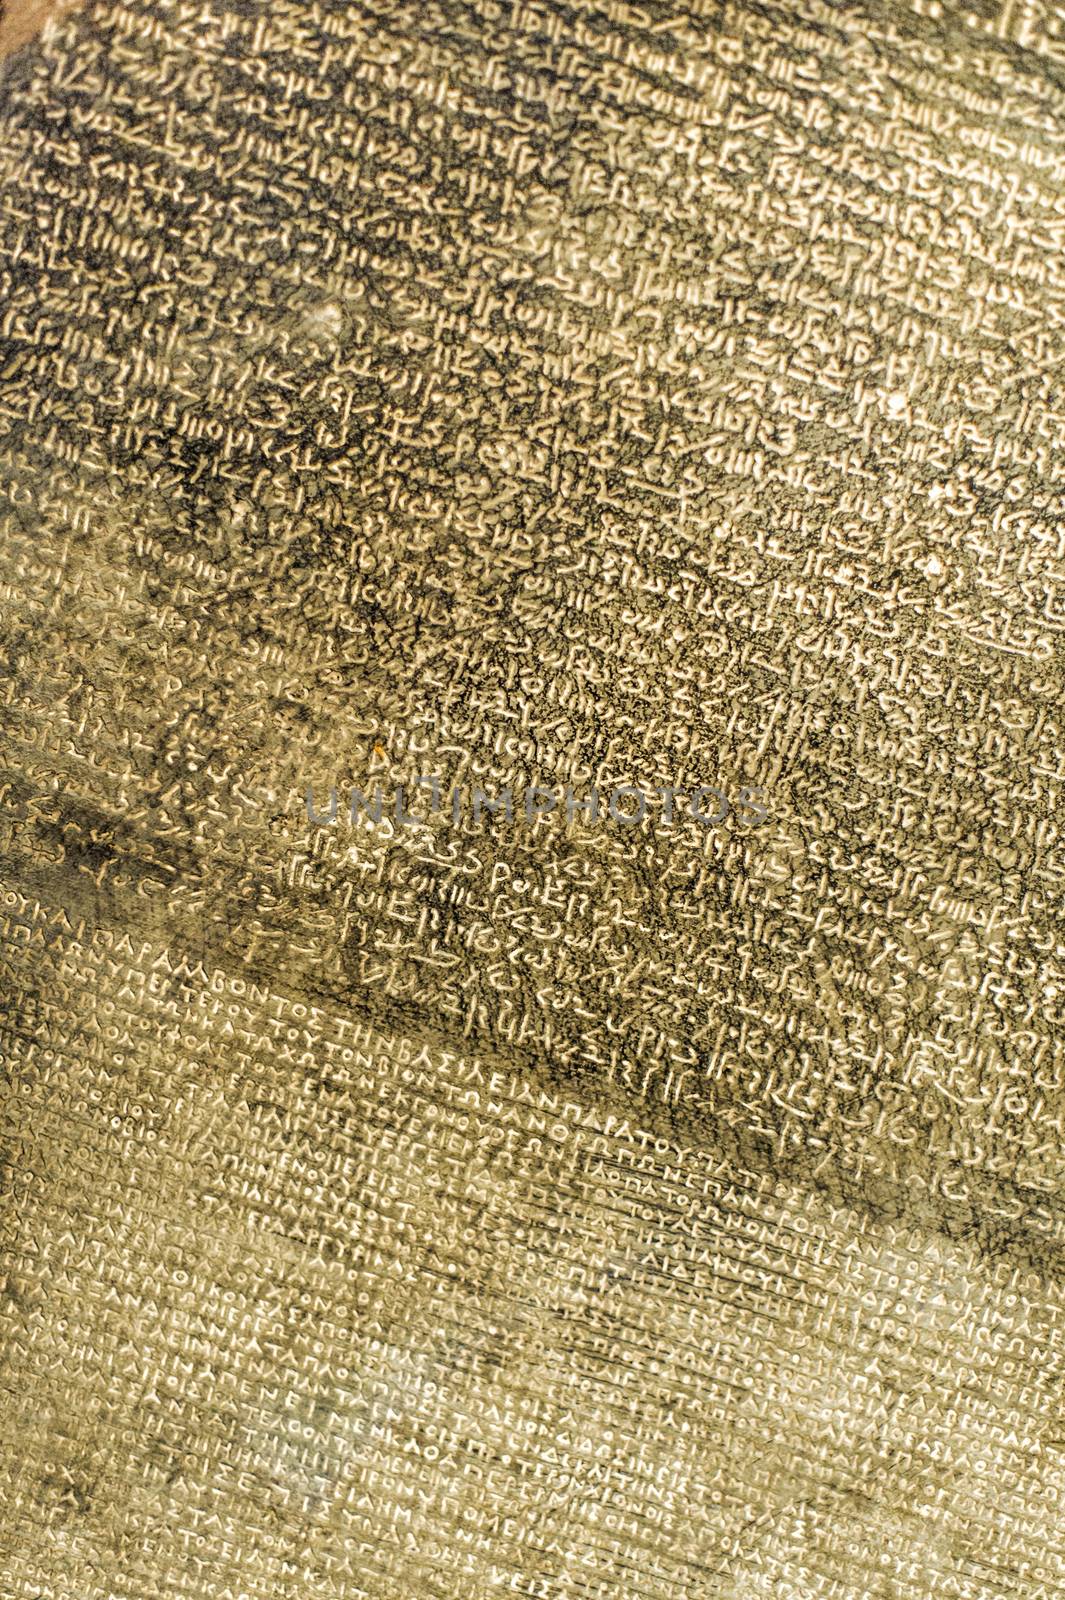 Close up on the text of Rosetta Stone